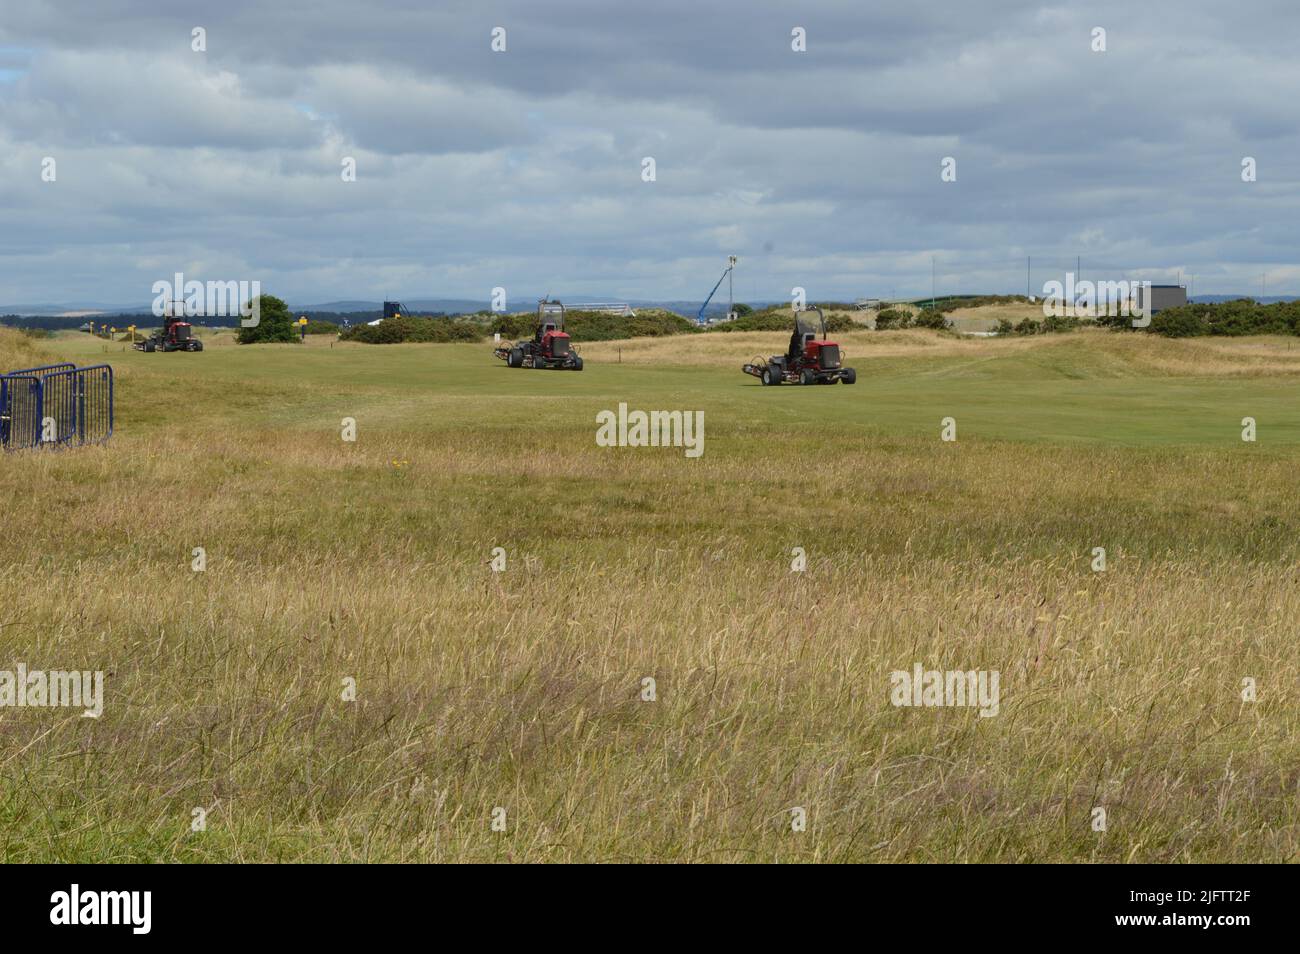 Preparations as at 5 July for the 150th Open Golf Championship, St Andrews, Scotland, just a few days to go for the start Stock Photo